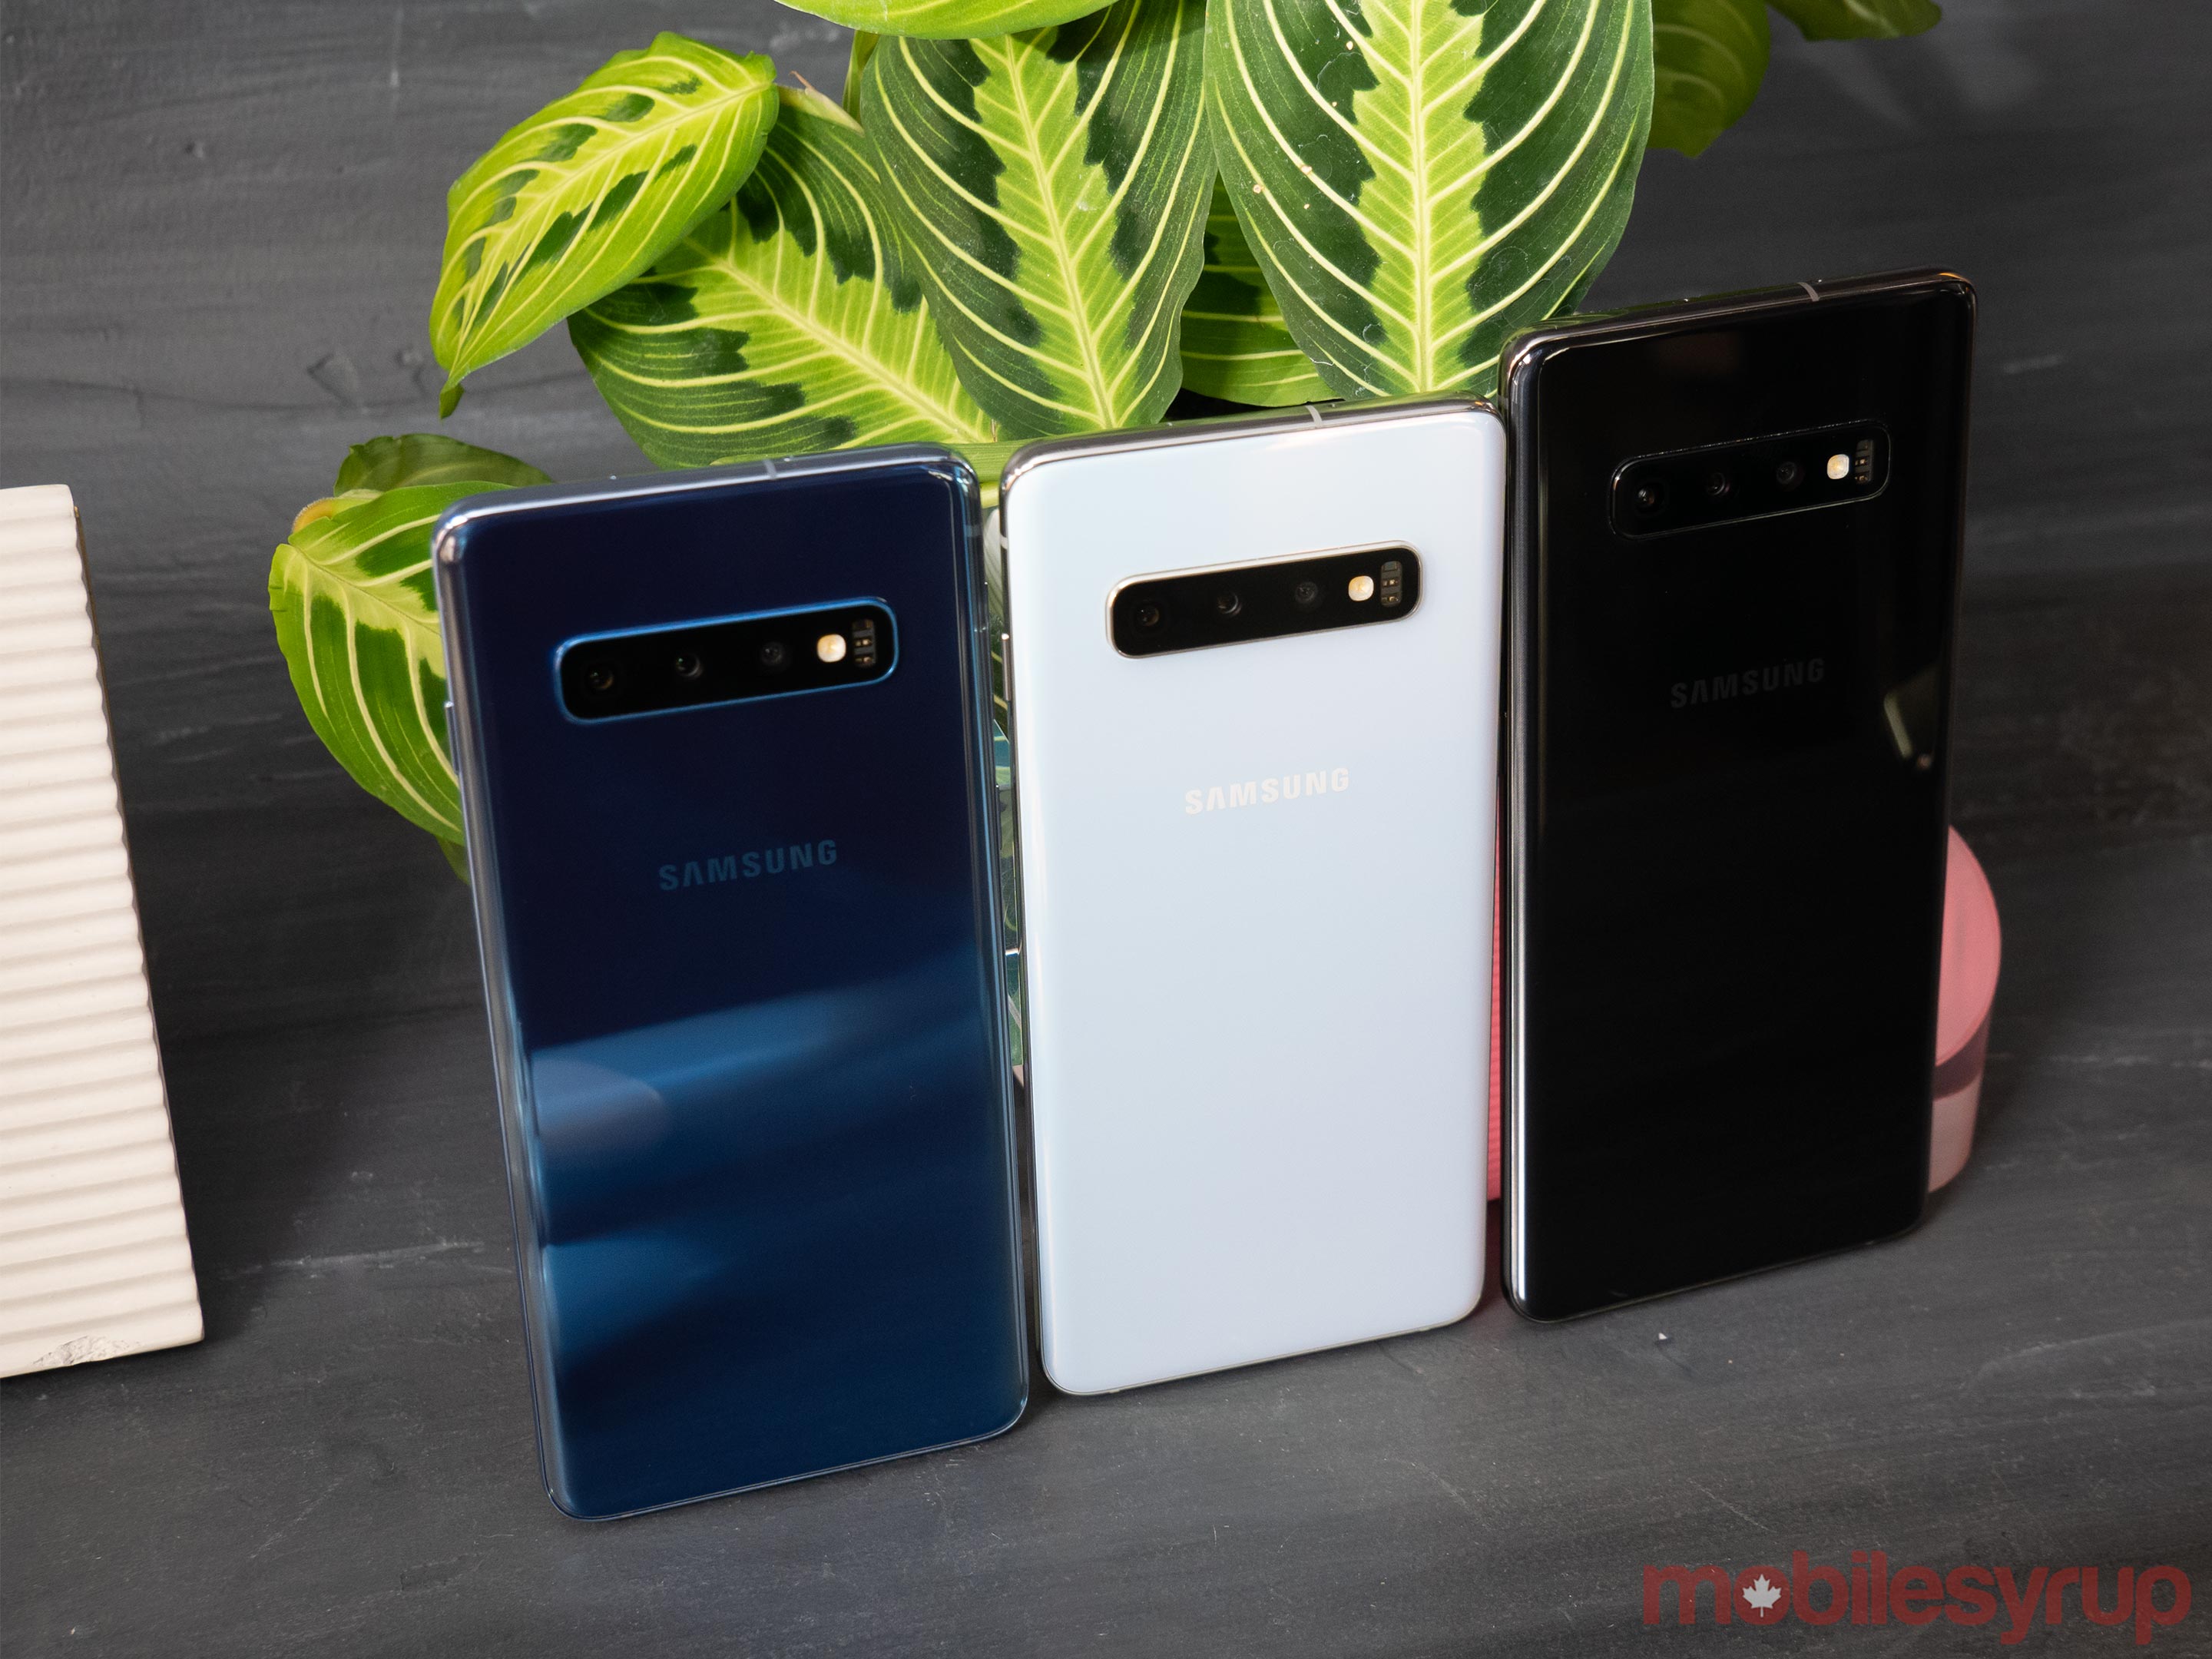 Samsung Galaxy S10 S10 And S10e Hands On Beyond Last Year S Notches